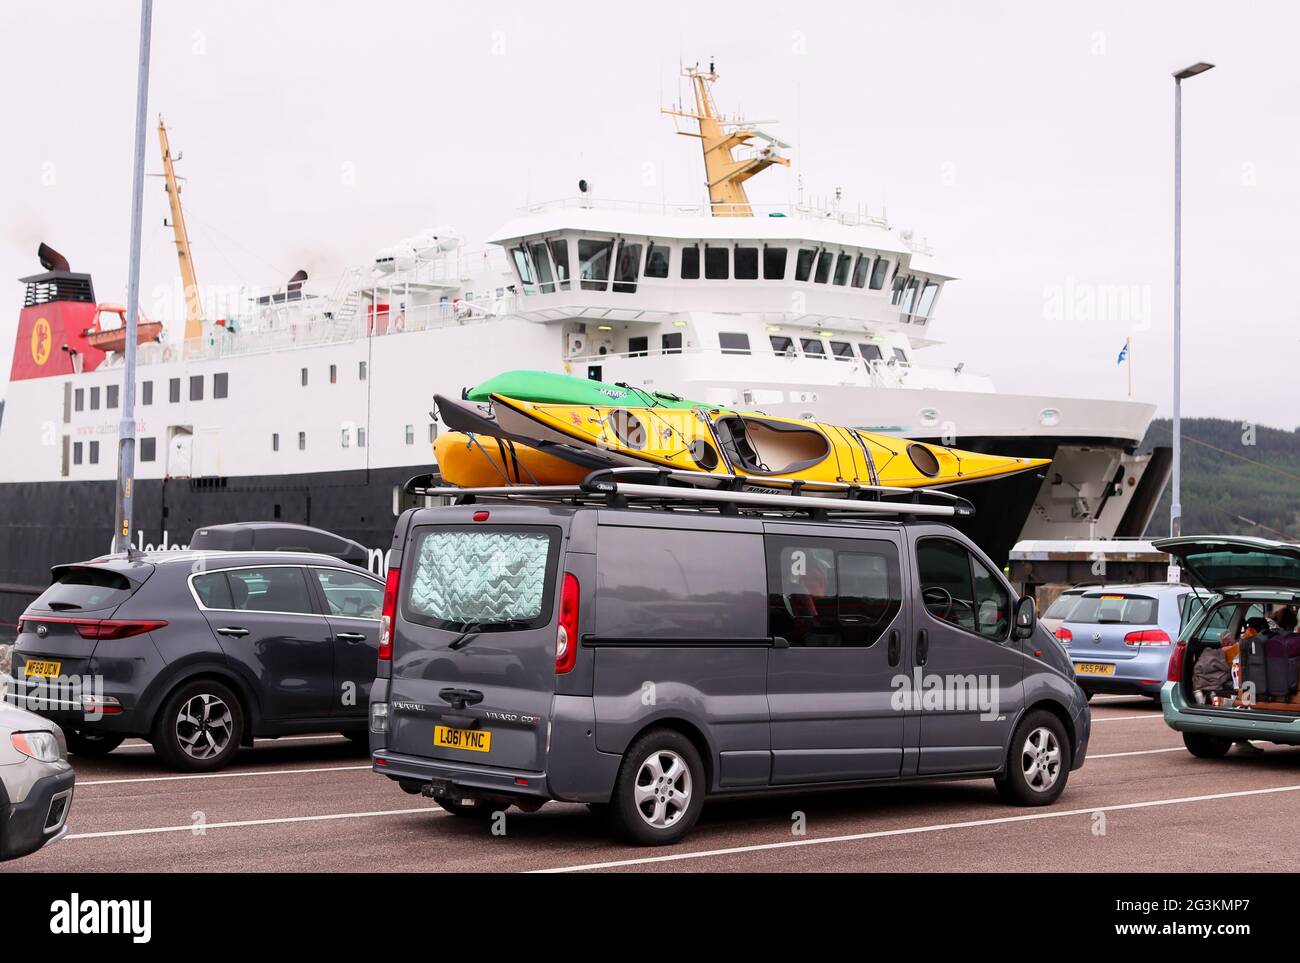 People enjoying a staycation wait to board the car ferry to take them to the Isle of Islay and other Inner Hebrides islands off Scotland's west coast Stock Photo